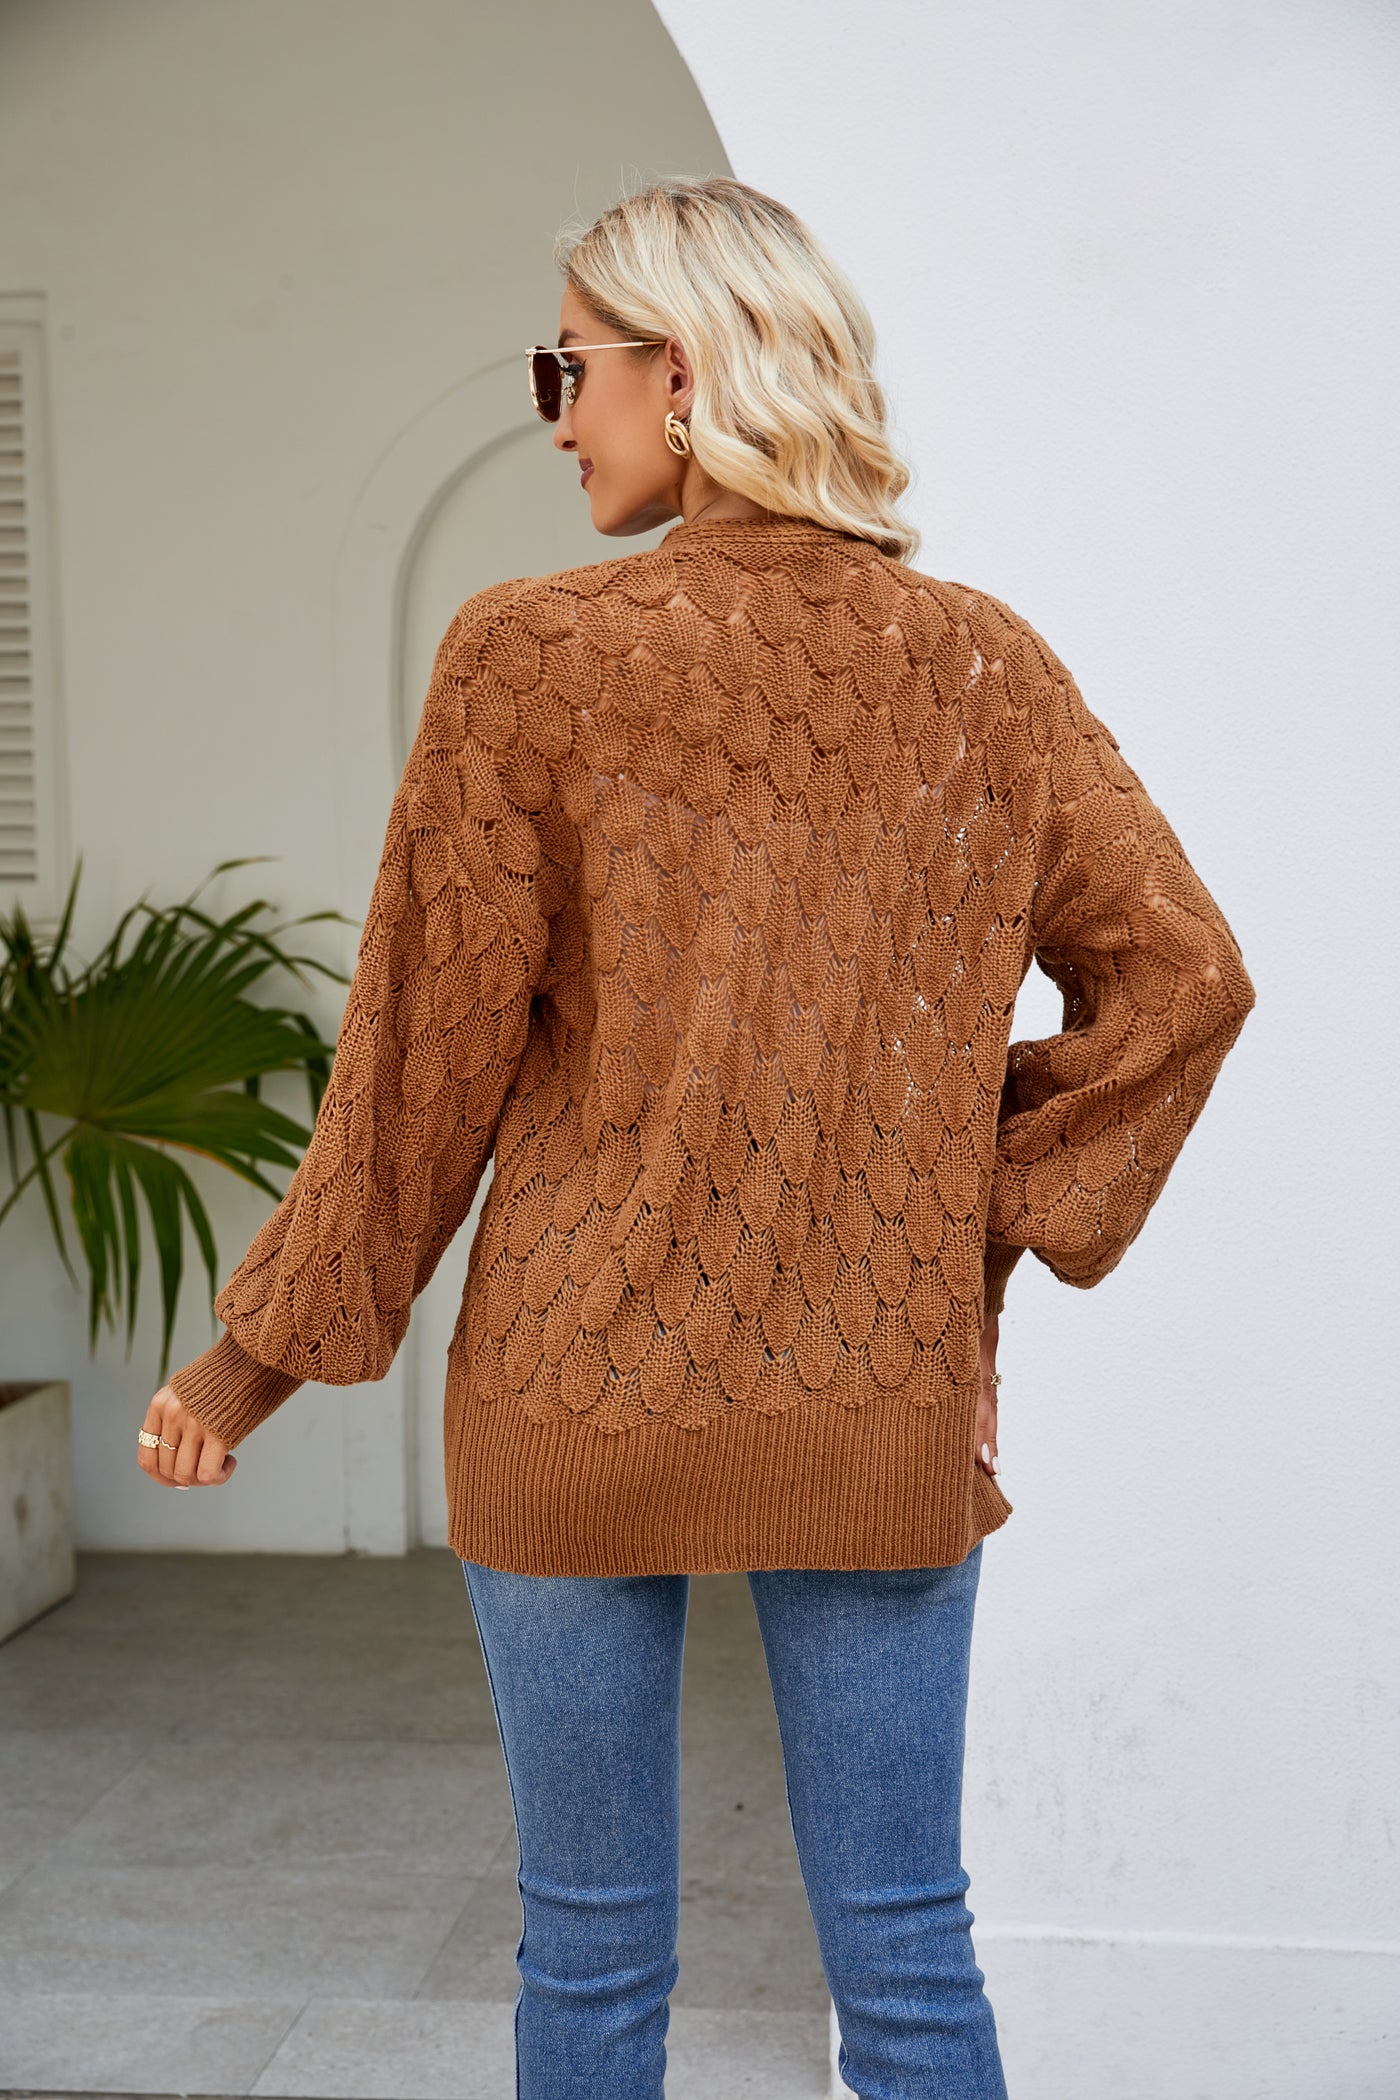 Loose Lazy Mid Length Sweater Coat Women Clothing Design Hollow Out Cutout Out Knitted Sweater Cardigan